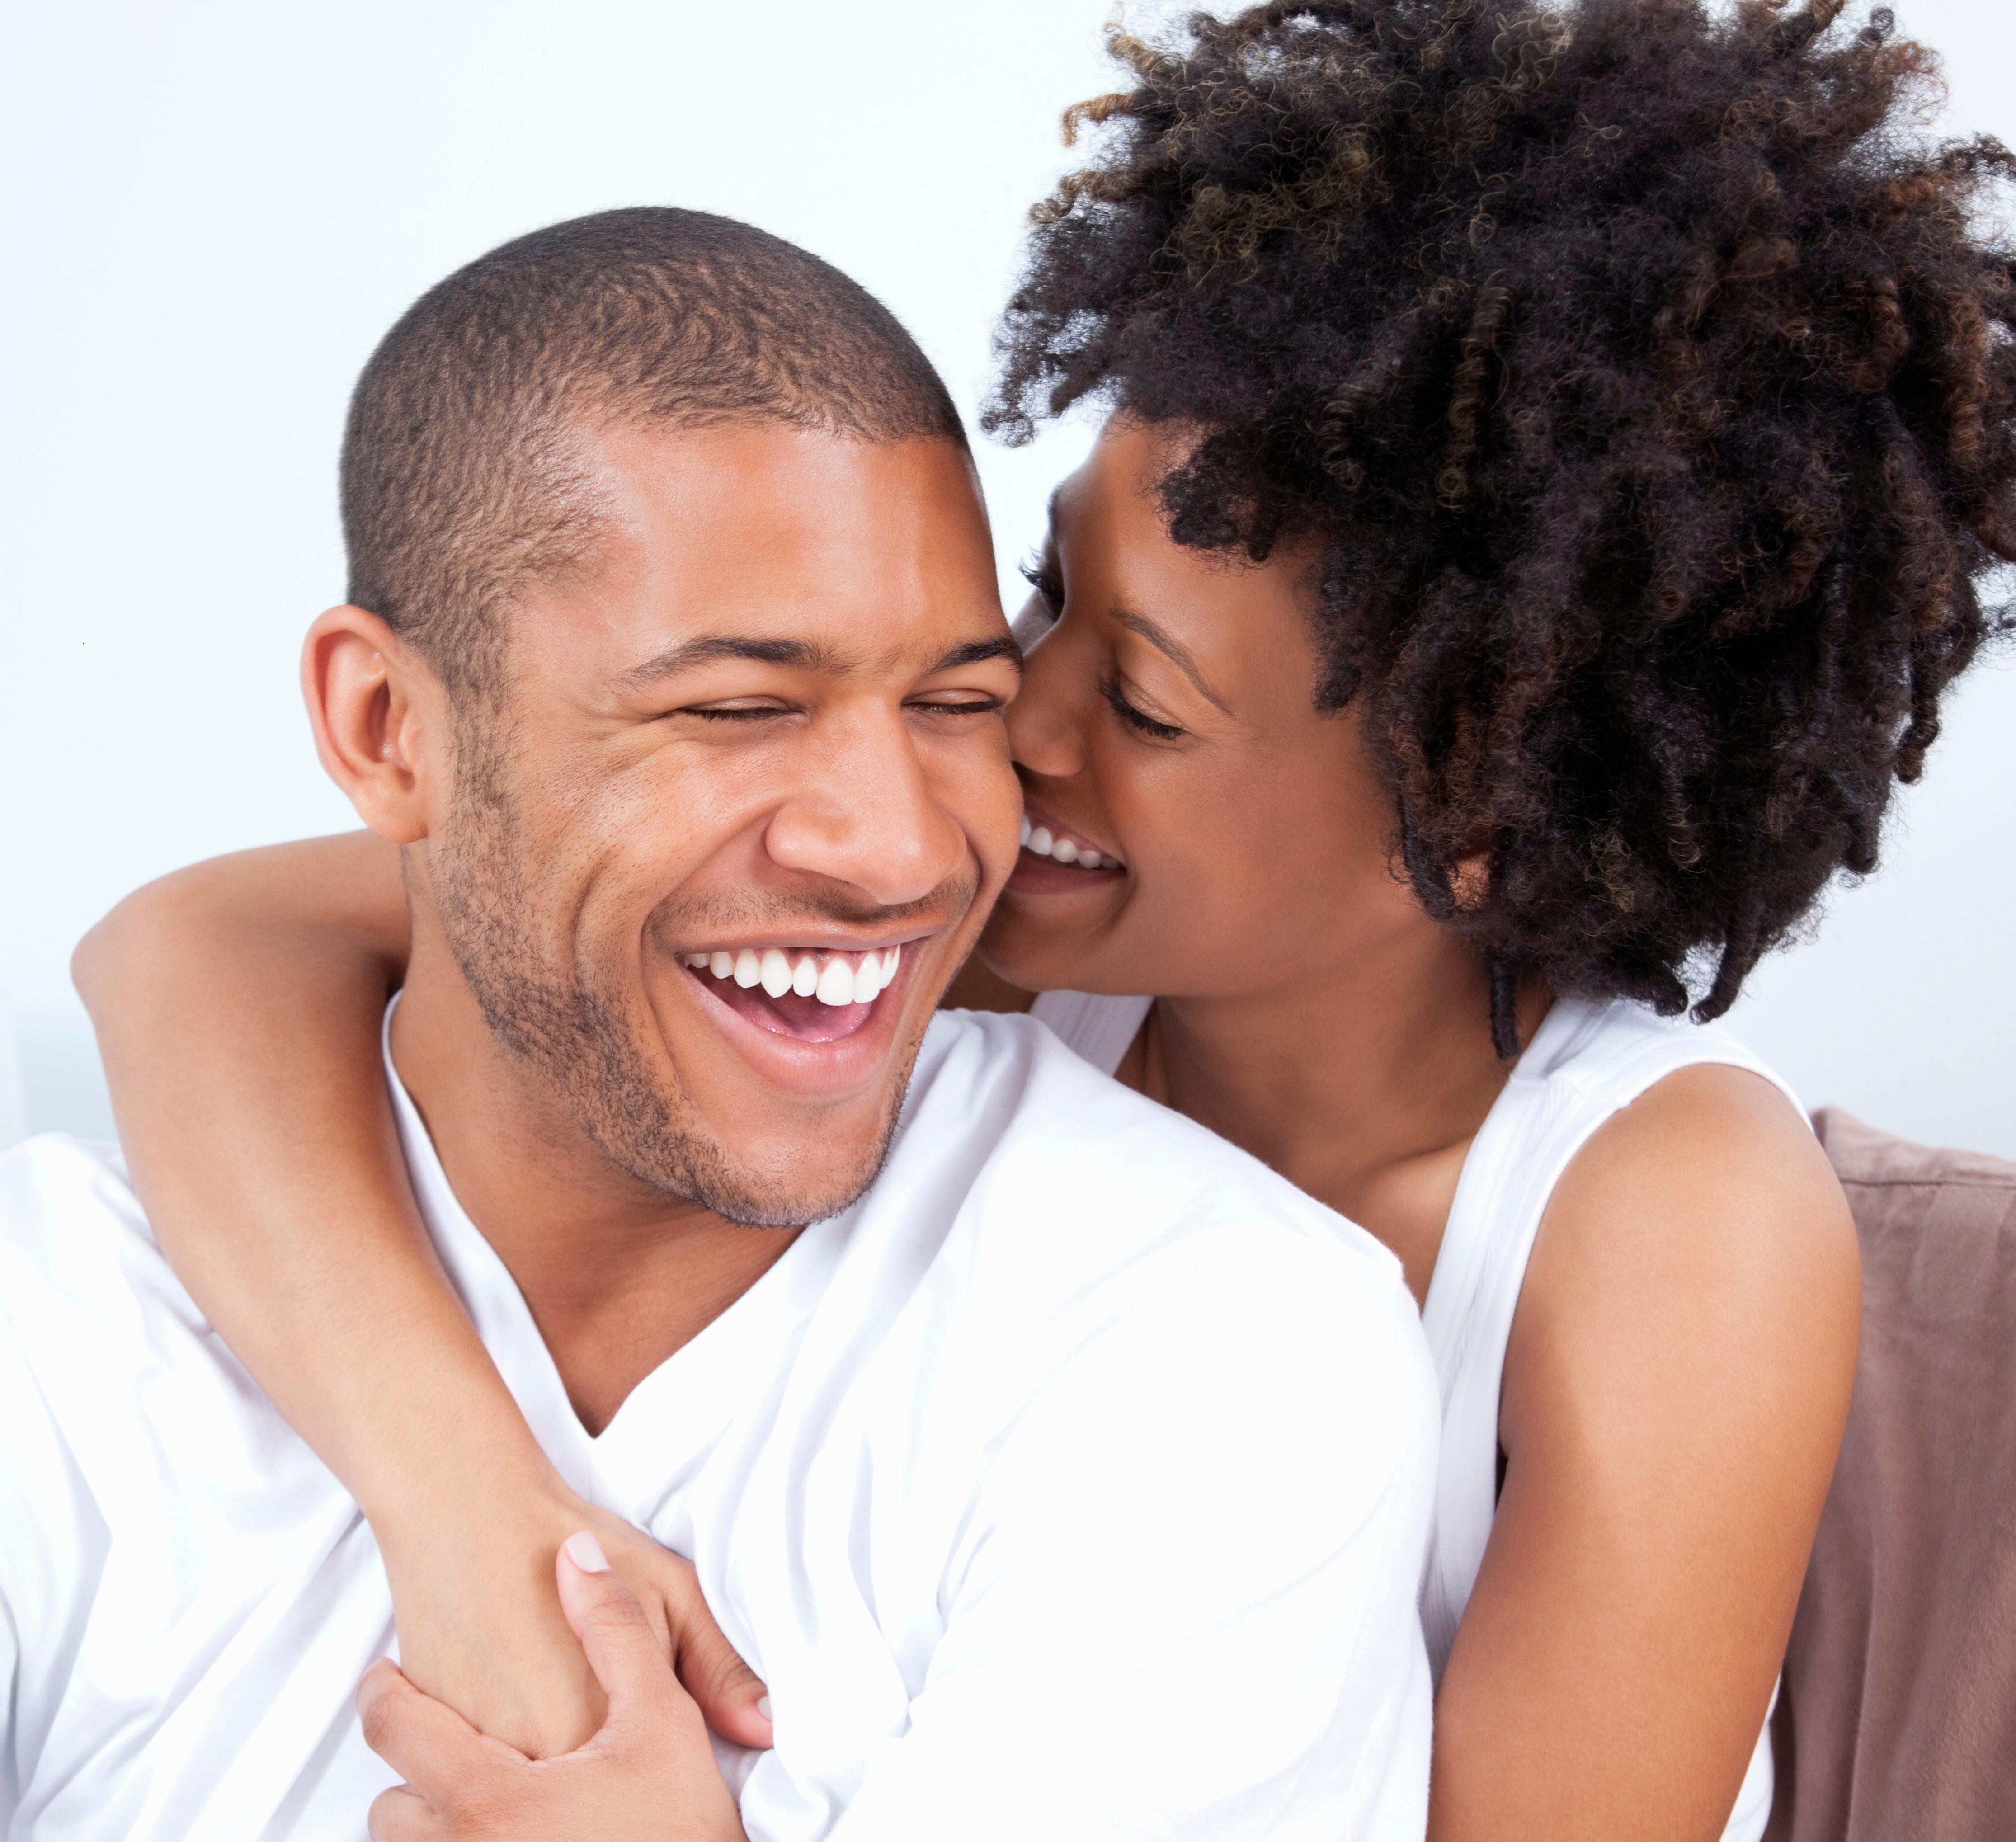 What It Means When Bae Does These 5 Things (and What It Says About Your Relationship)
